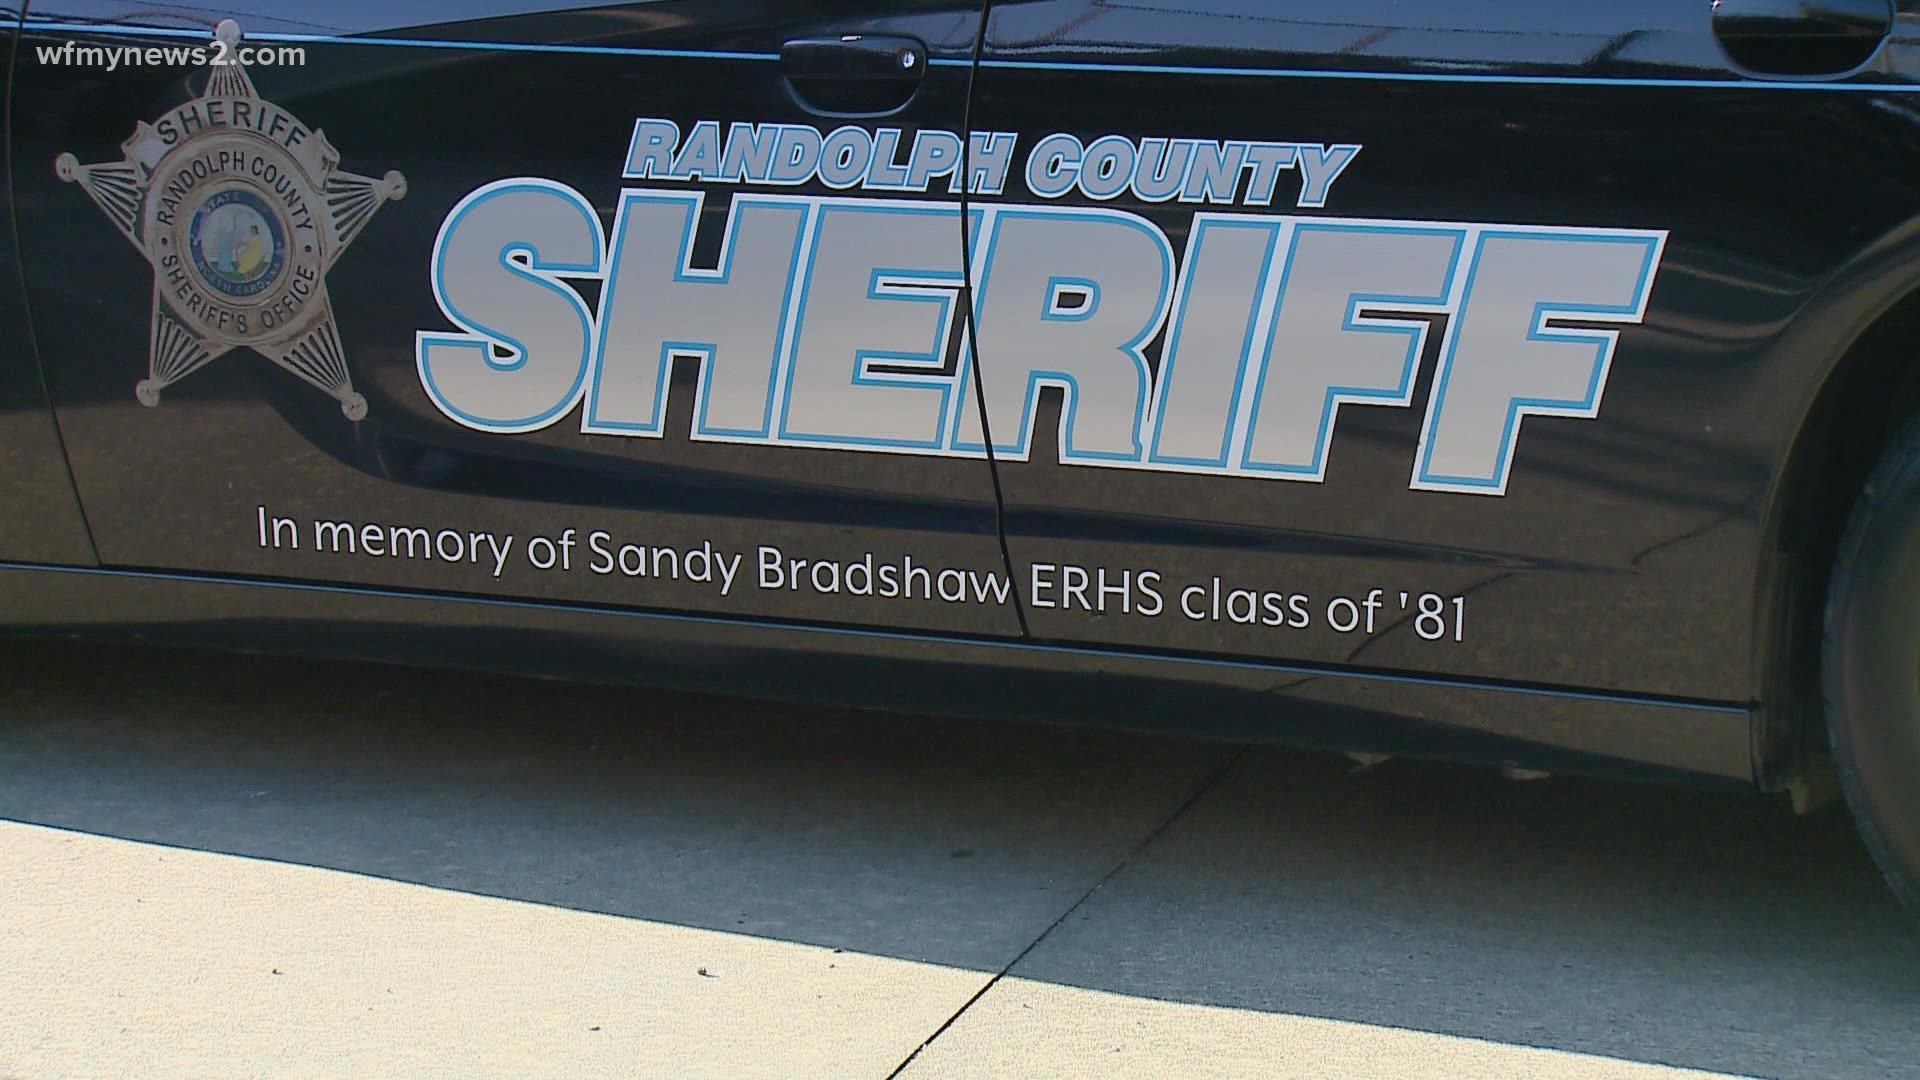 Sandy Bradshaw was a flight attendant on Flight 93. The Randolph Co. Sheriff’s office is honoring her life with new decals.